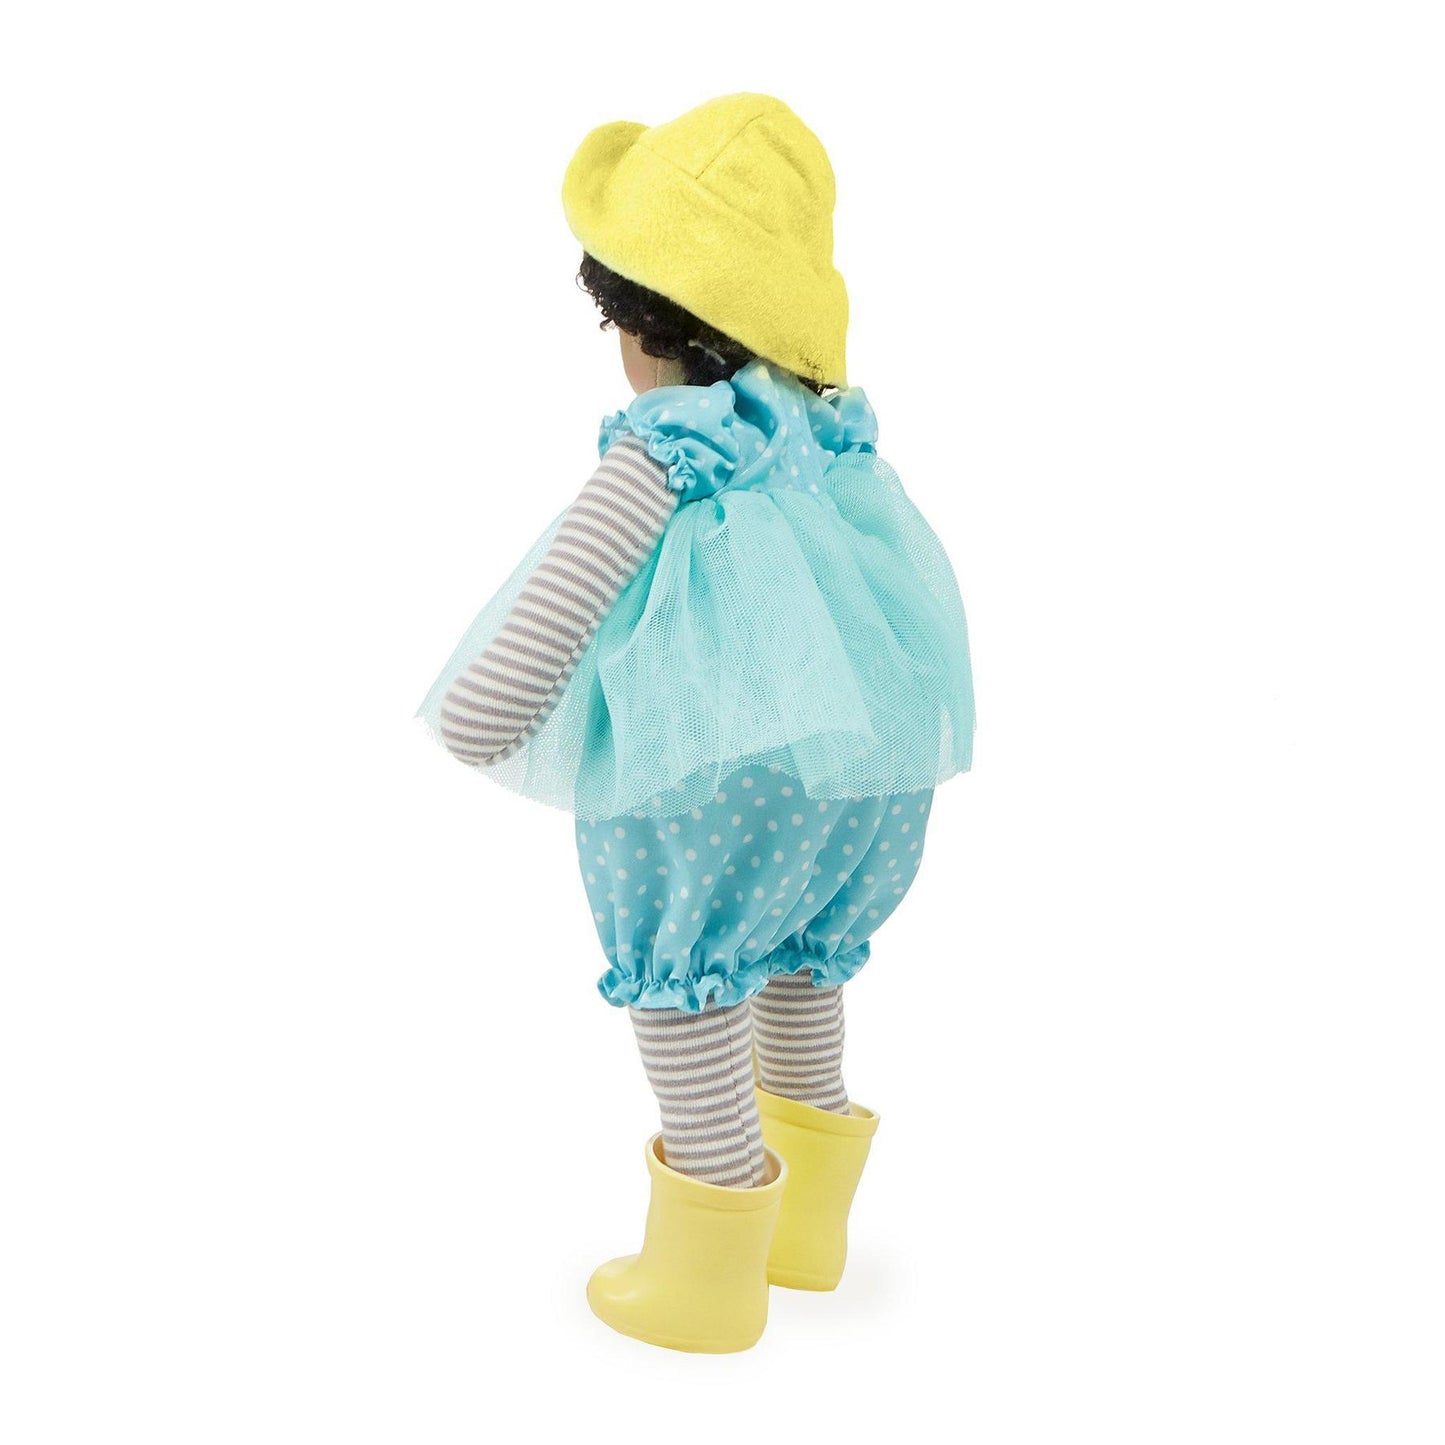 Baby and kids "Phoebe" Girl Friend plush Doll with doll hat and doll boots - Bunnies by the Bay